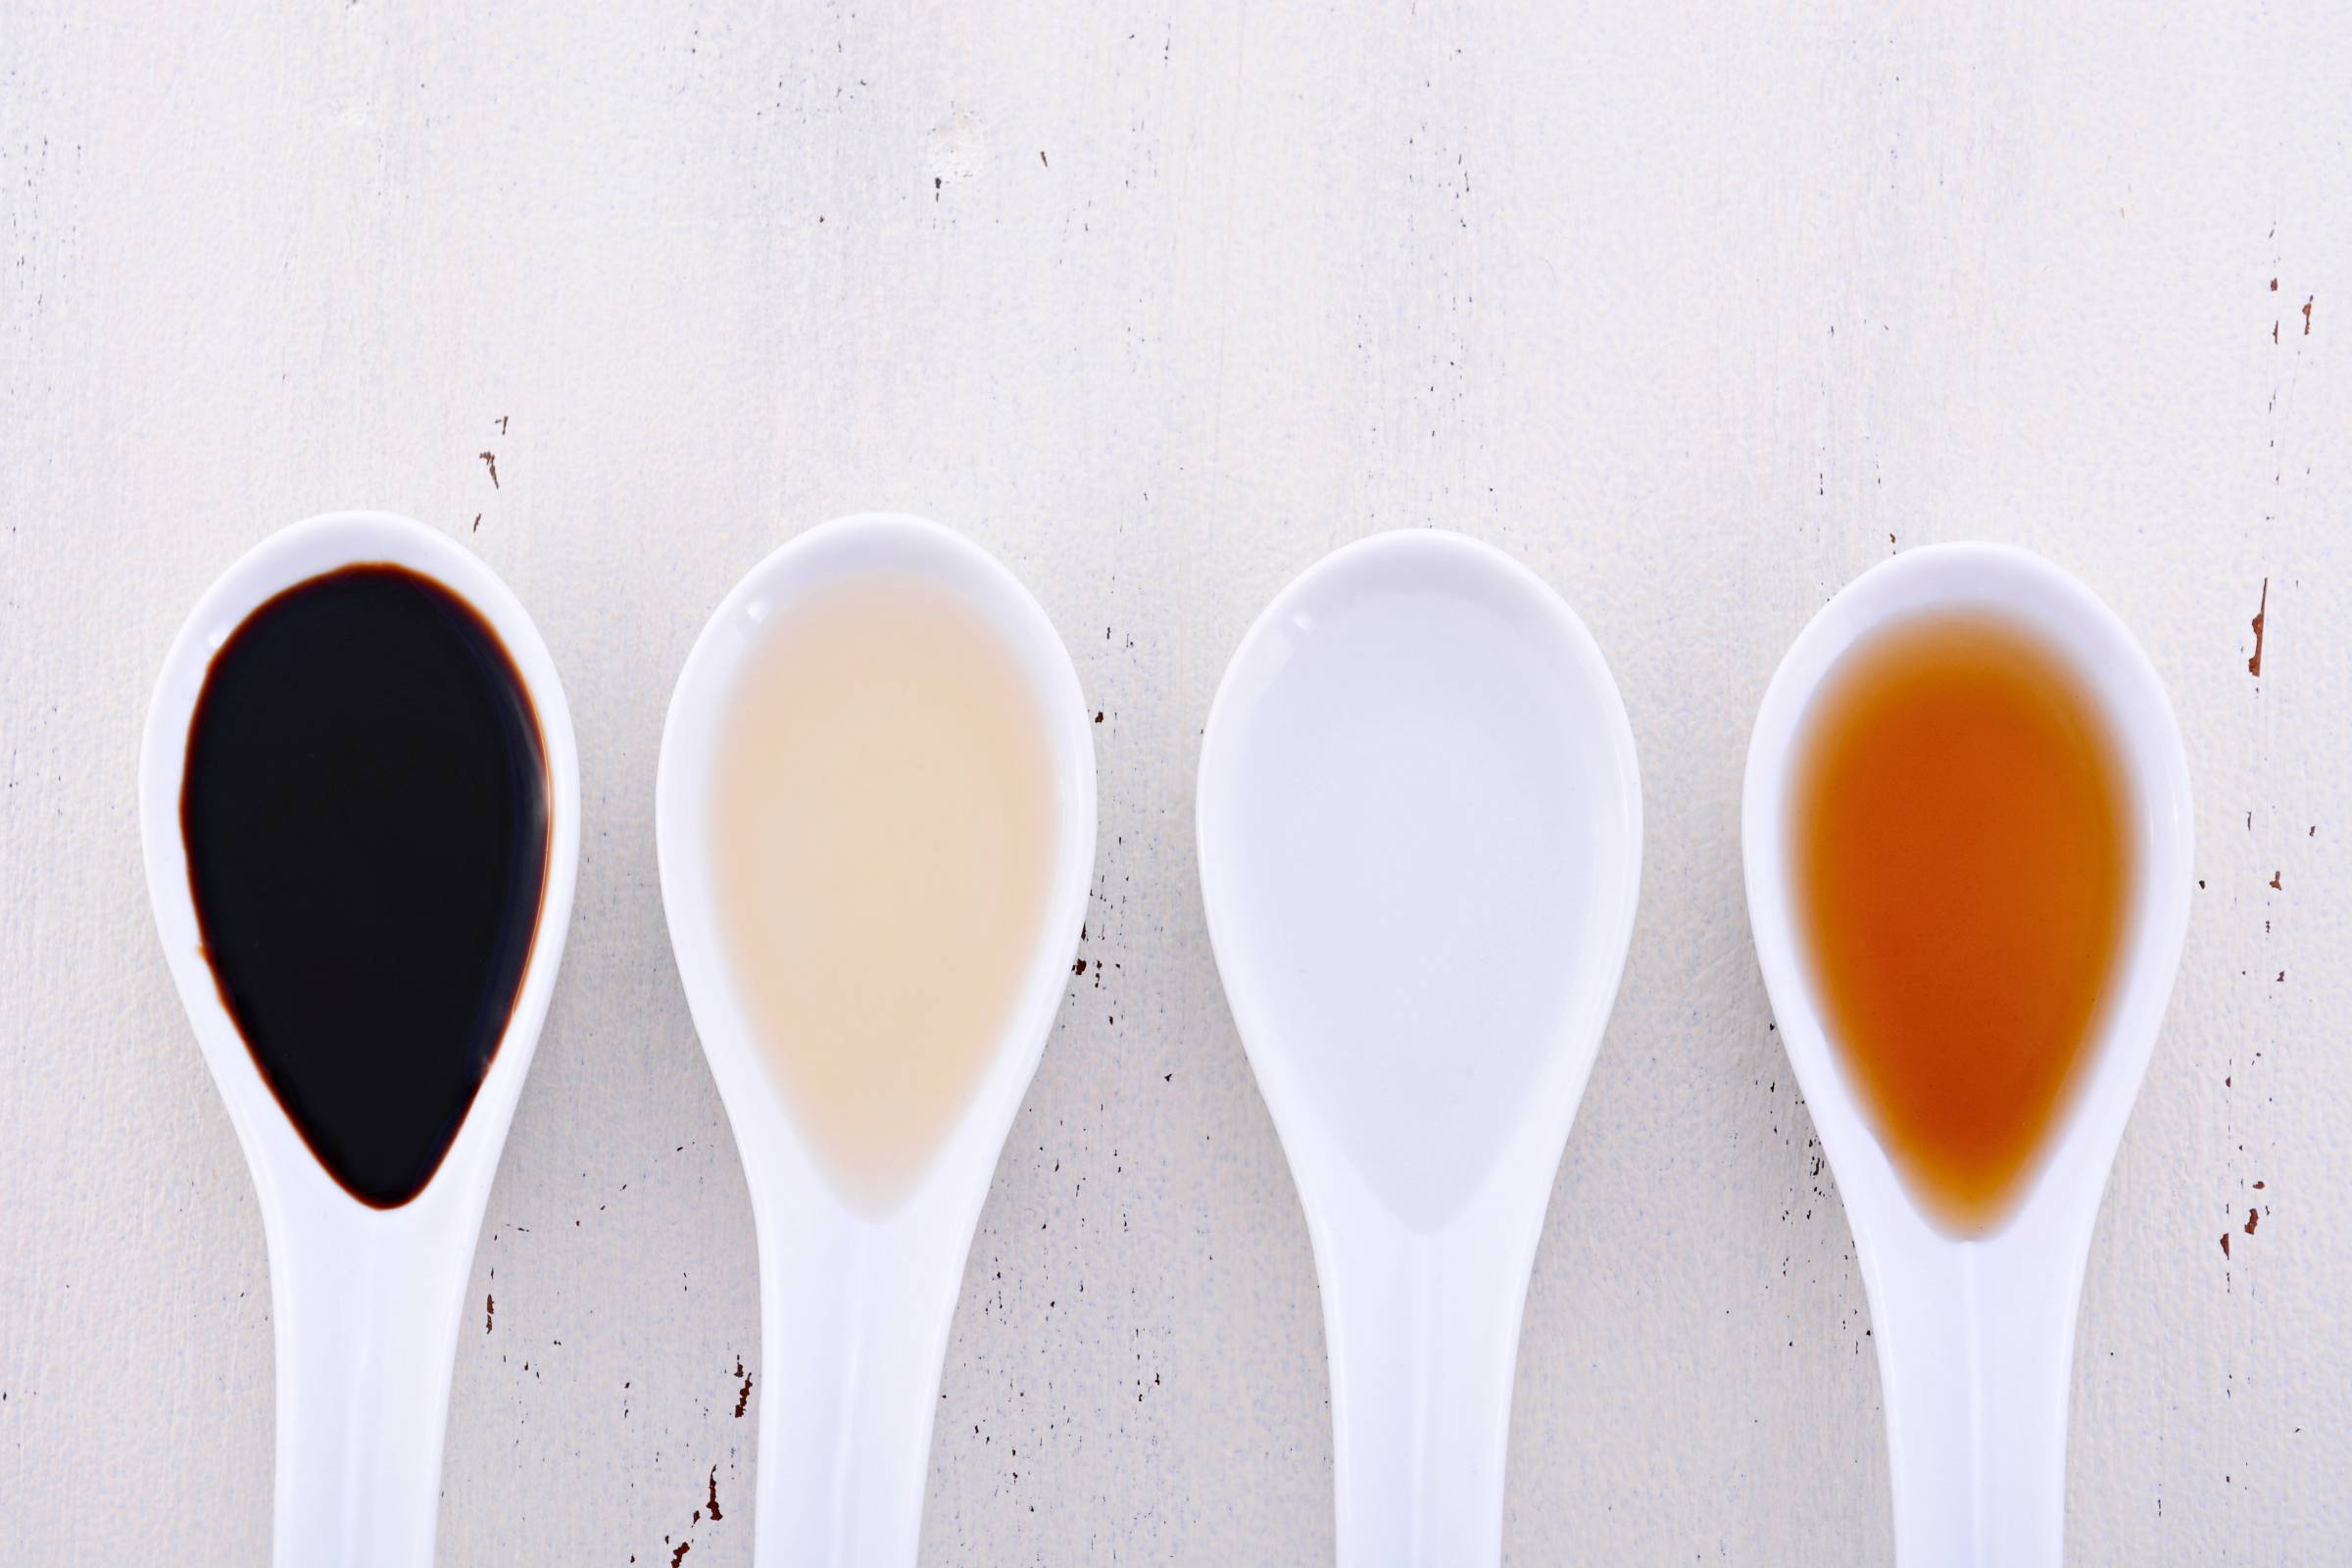 spoons full of different kinds of vinegar